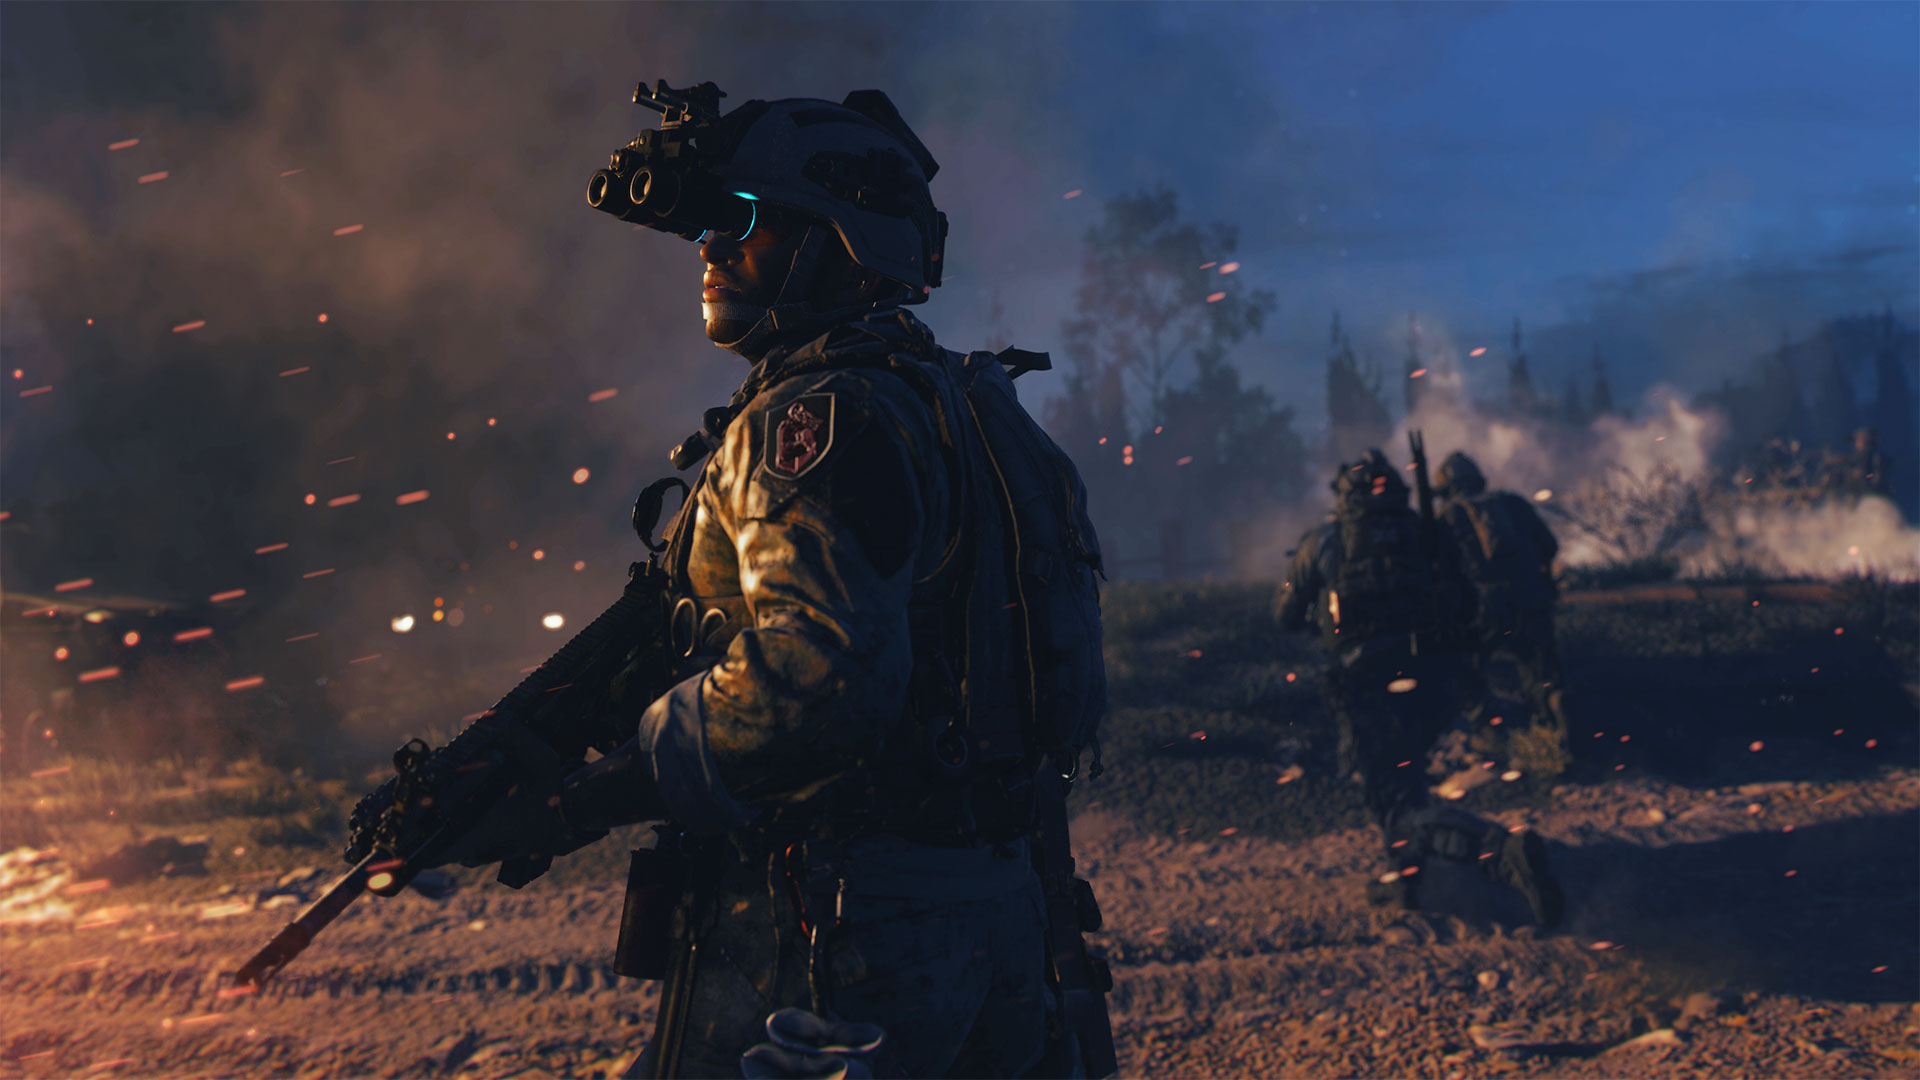 Call of Duty's new Combat Readiness Program makes multiplayer more